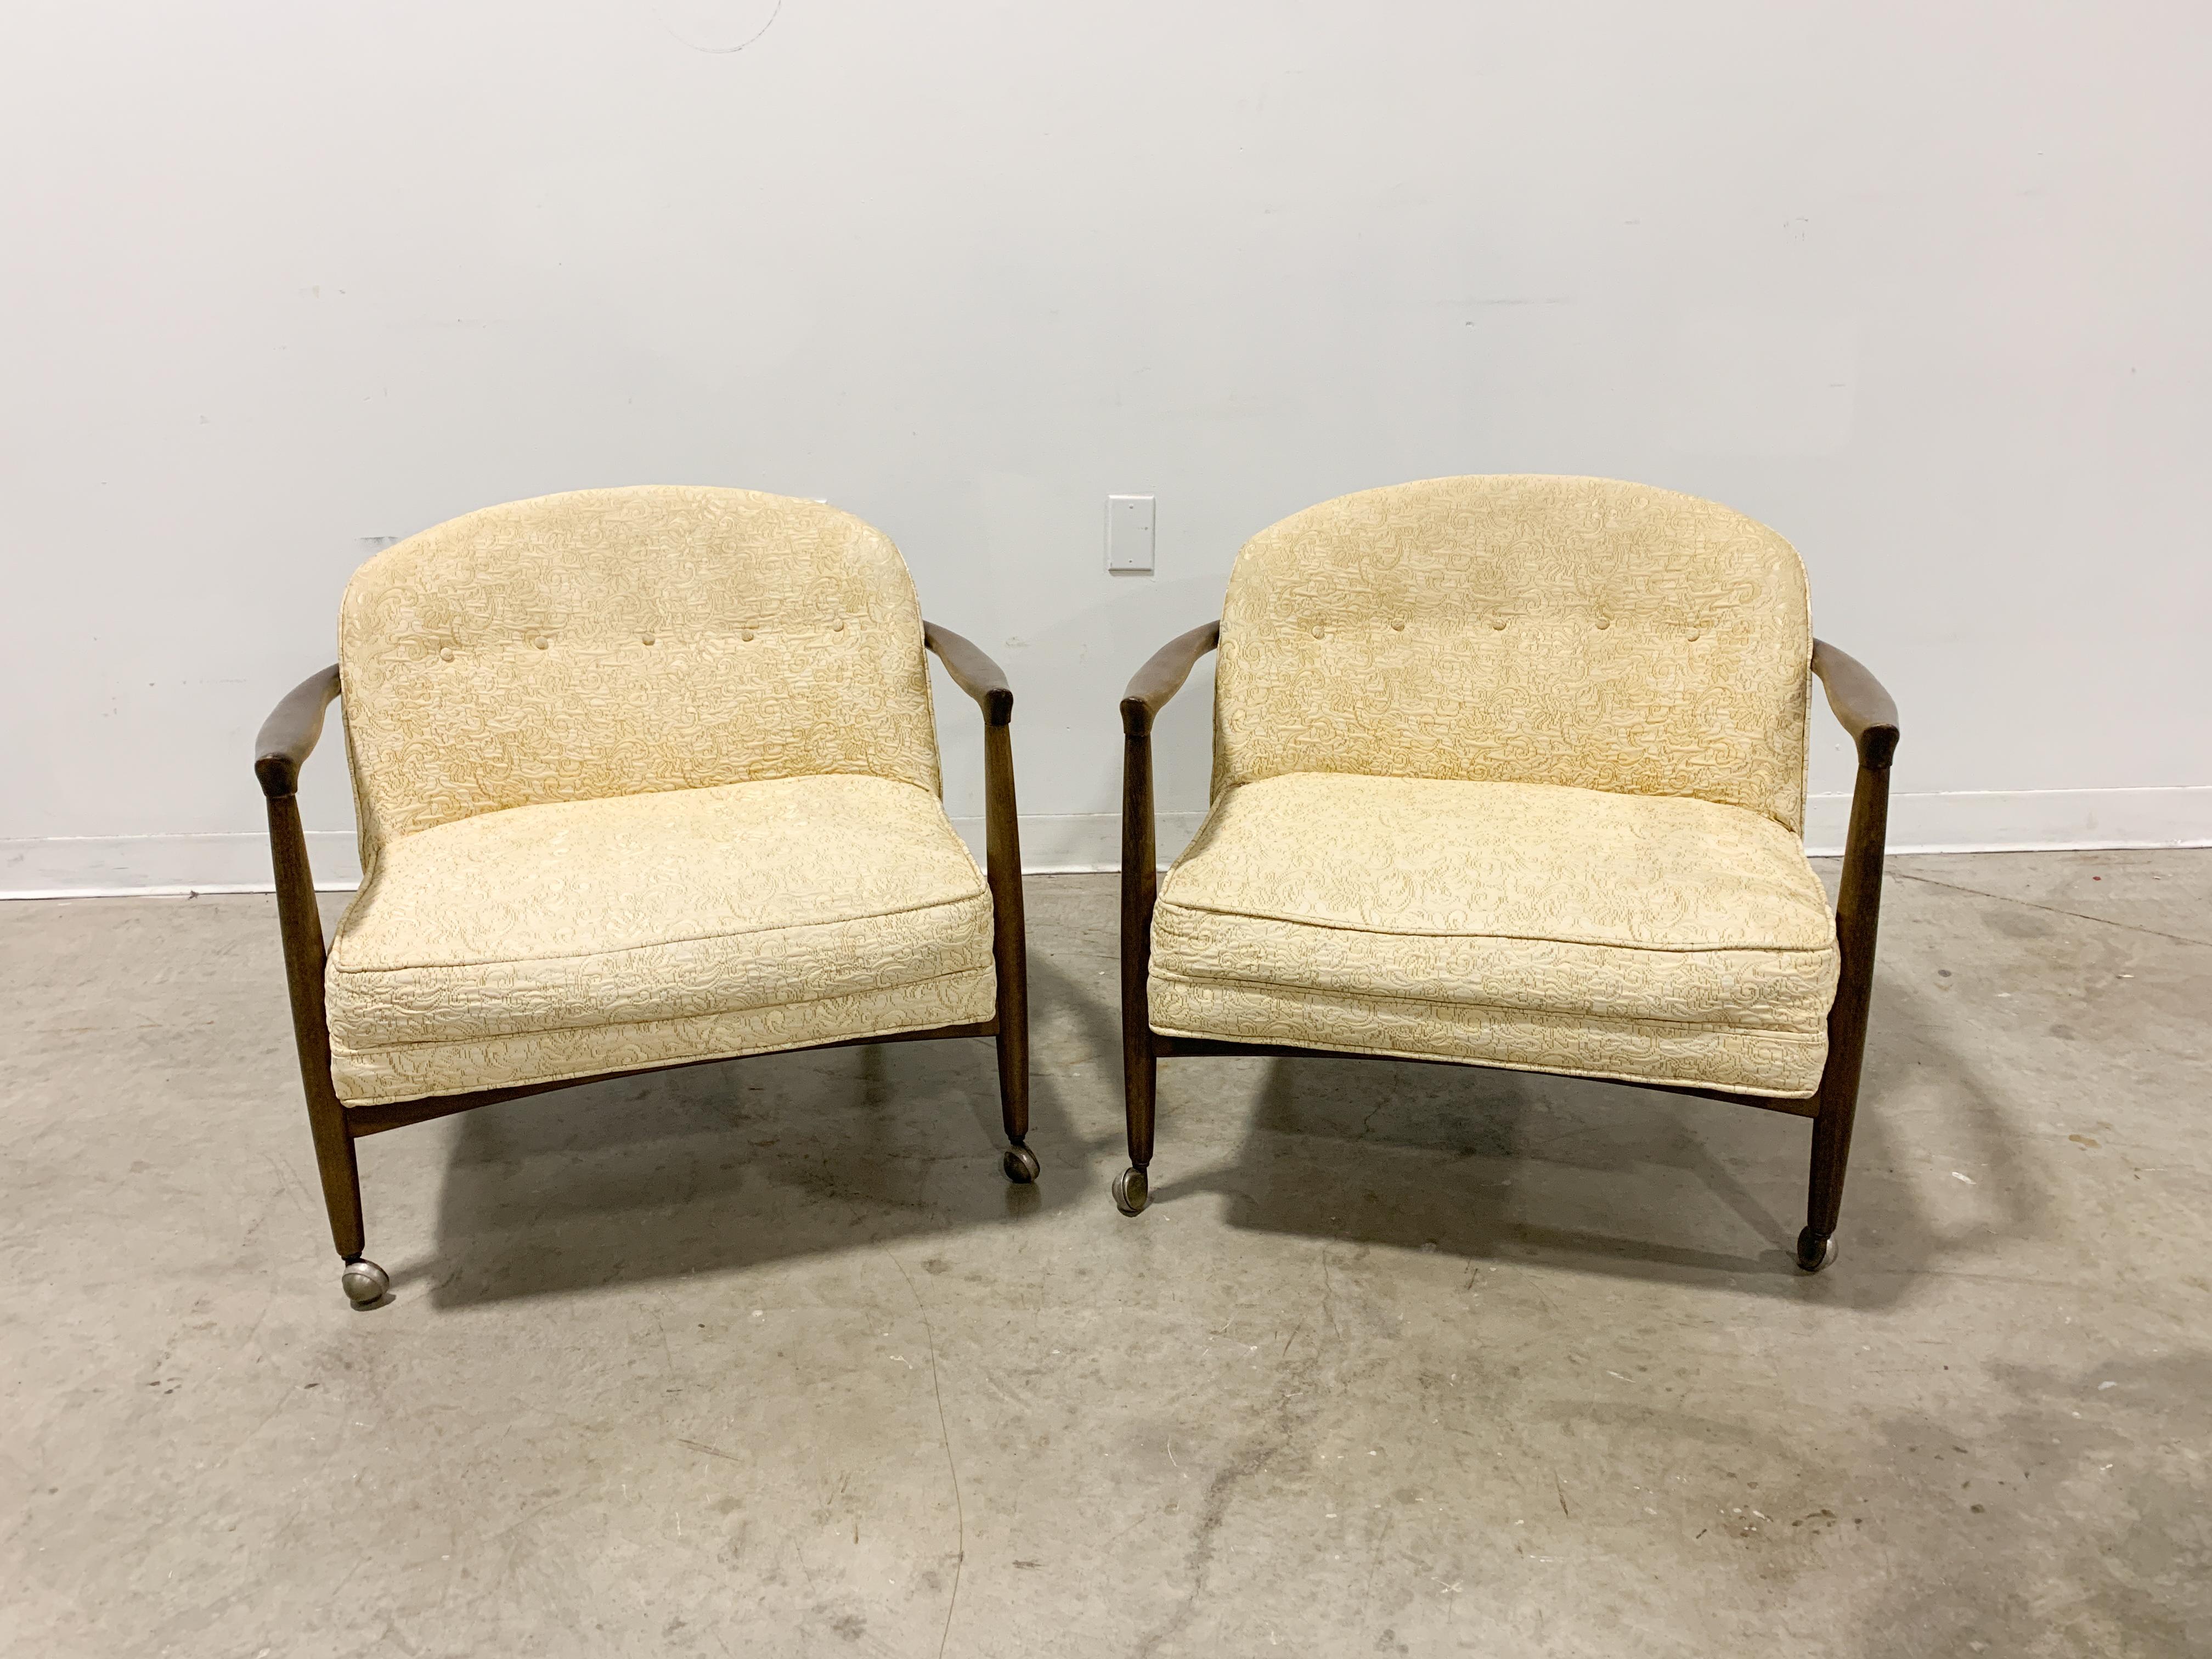 Very comfortable barrel back lounge chairs designed by Finn Andersen and distributed by Selig. Solid beech frames with a tinted lacquer finish cradle a seat of original foam and upholstery. Chairs are in very good original condition with occasional